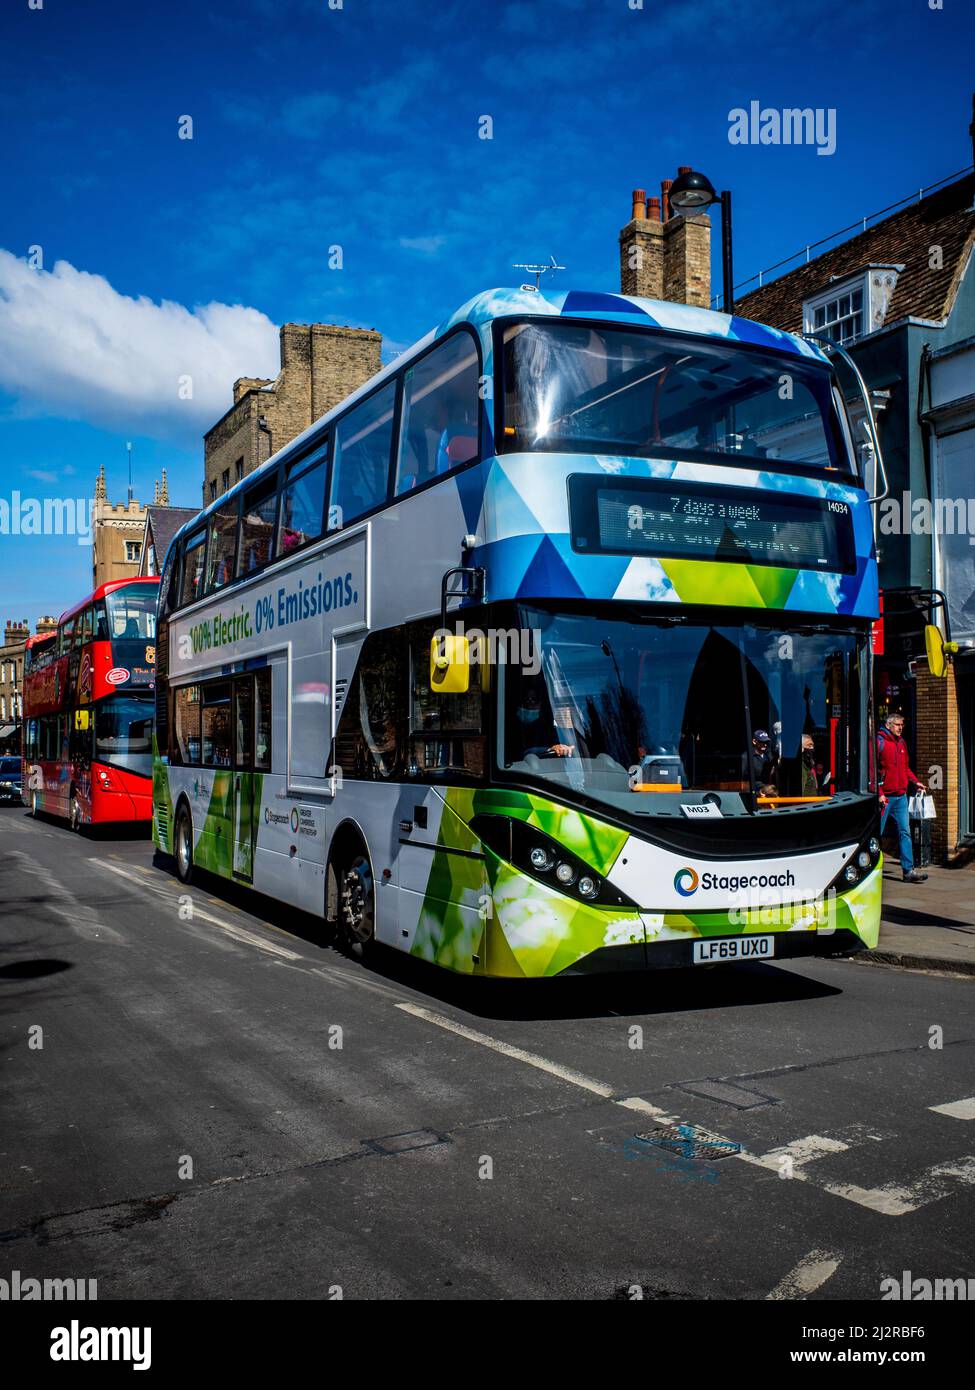 Electric Bus in Cambridge UK. 100% Electric double deck bus operated by Stagecoach. Zero Emission - 8 hr charge time for 160 mile range. Stock Photo